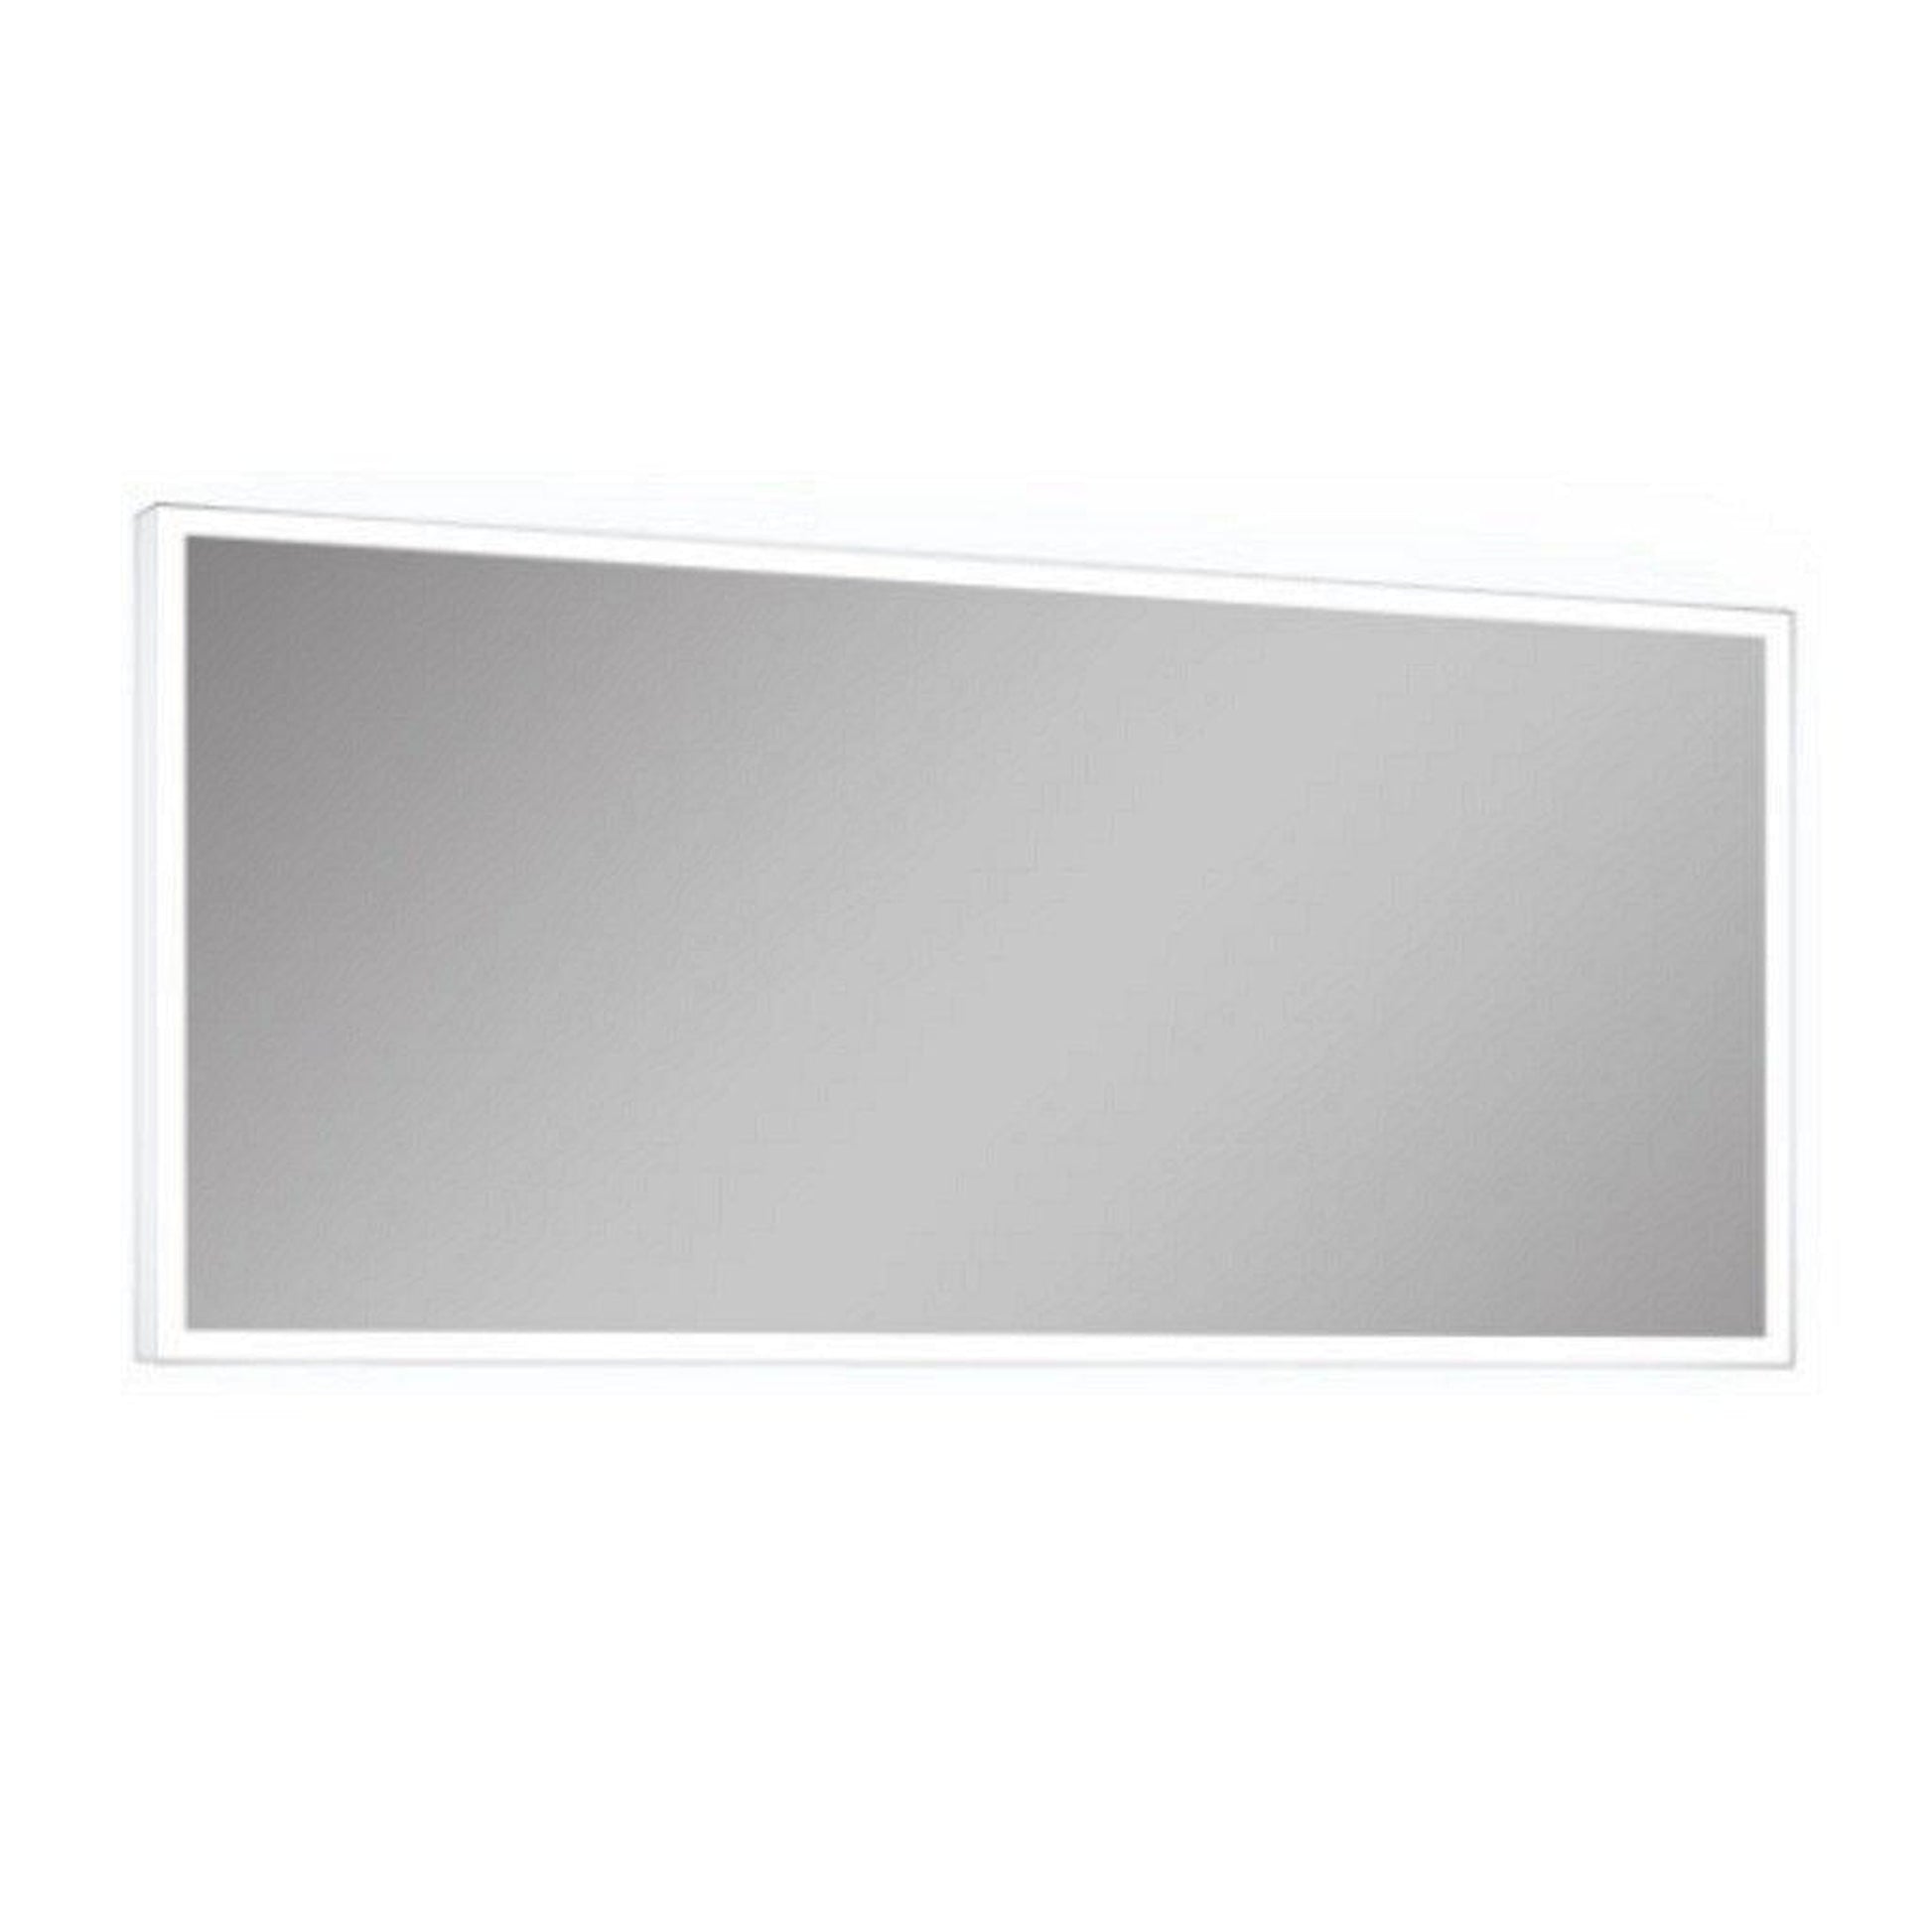 Lighted Impressions Bahama 48" x 24" Rectangular Frameless Wall-Mounted LED Mirror With On/Off IR Sensor